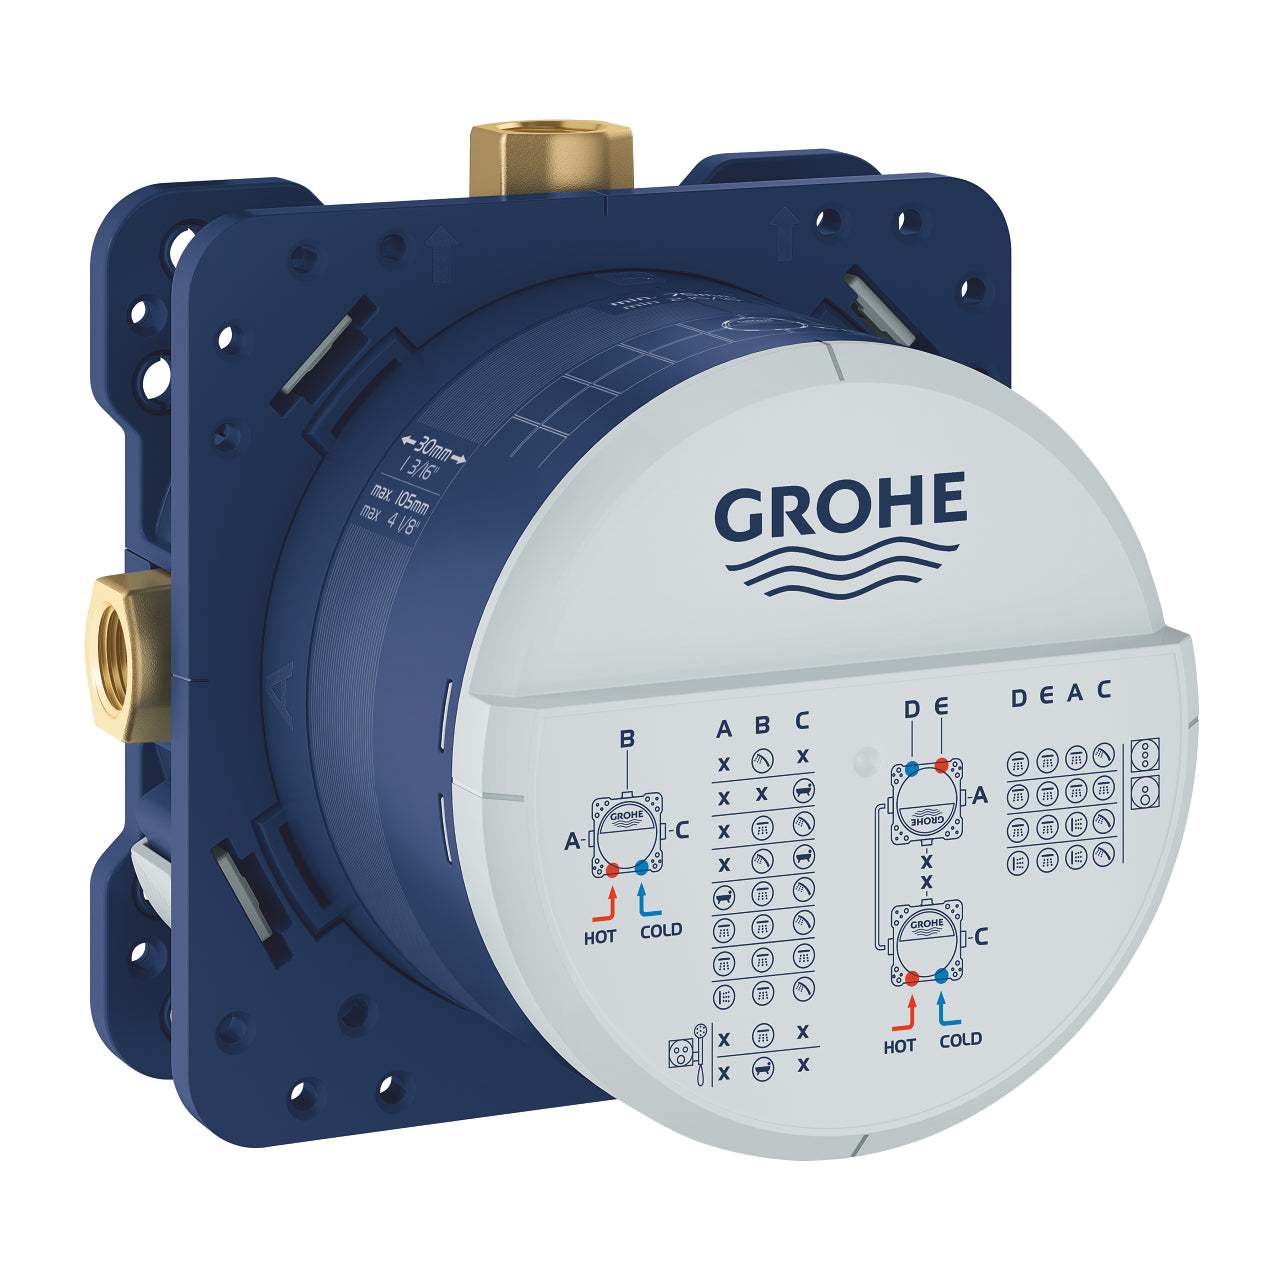 Grohe Grotherm Smart Control Thermostat Mixer Art. 29119000 + Art. 35600000